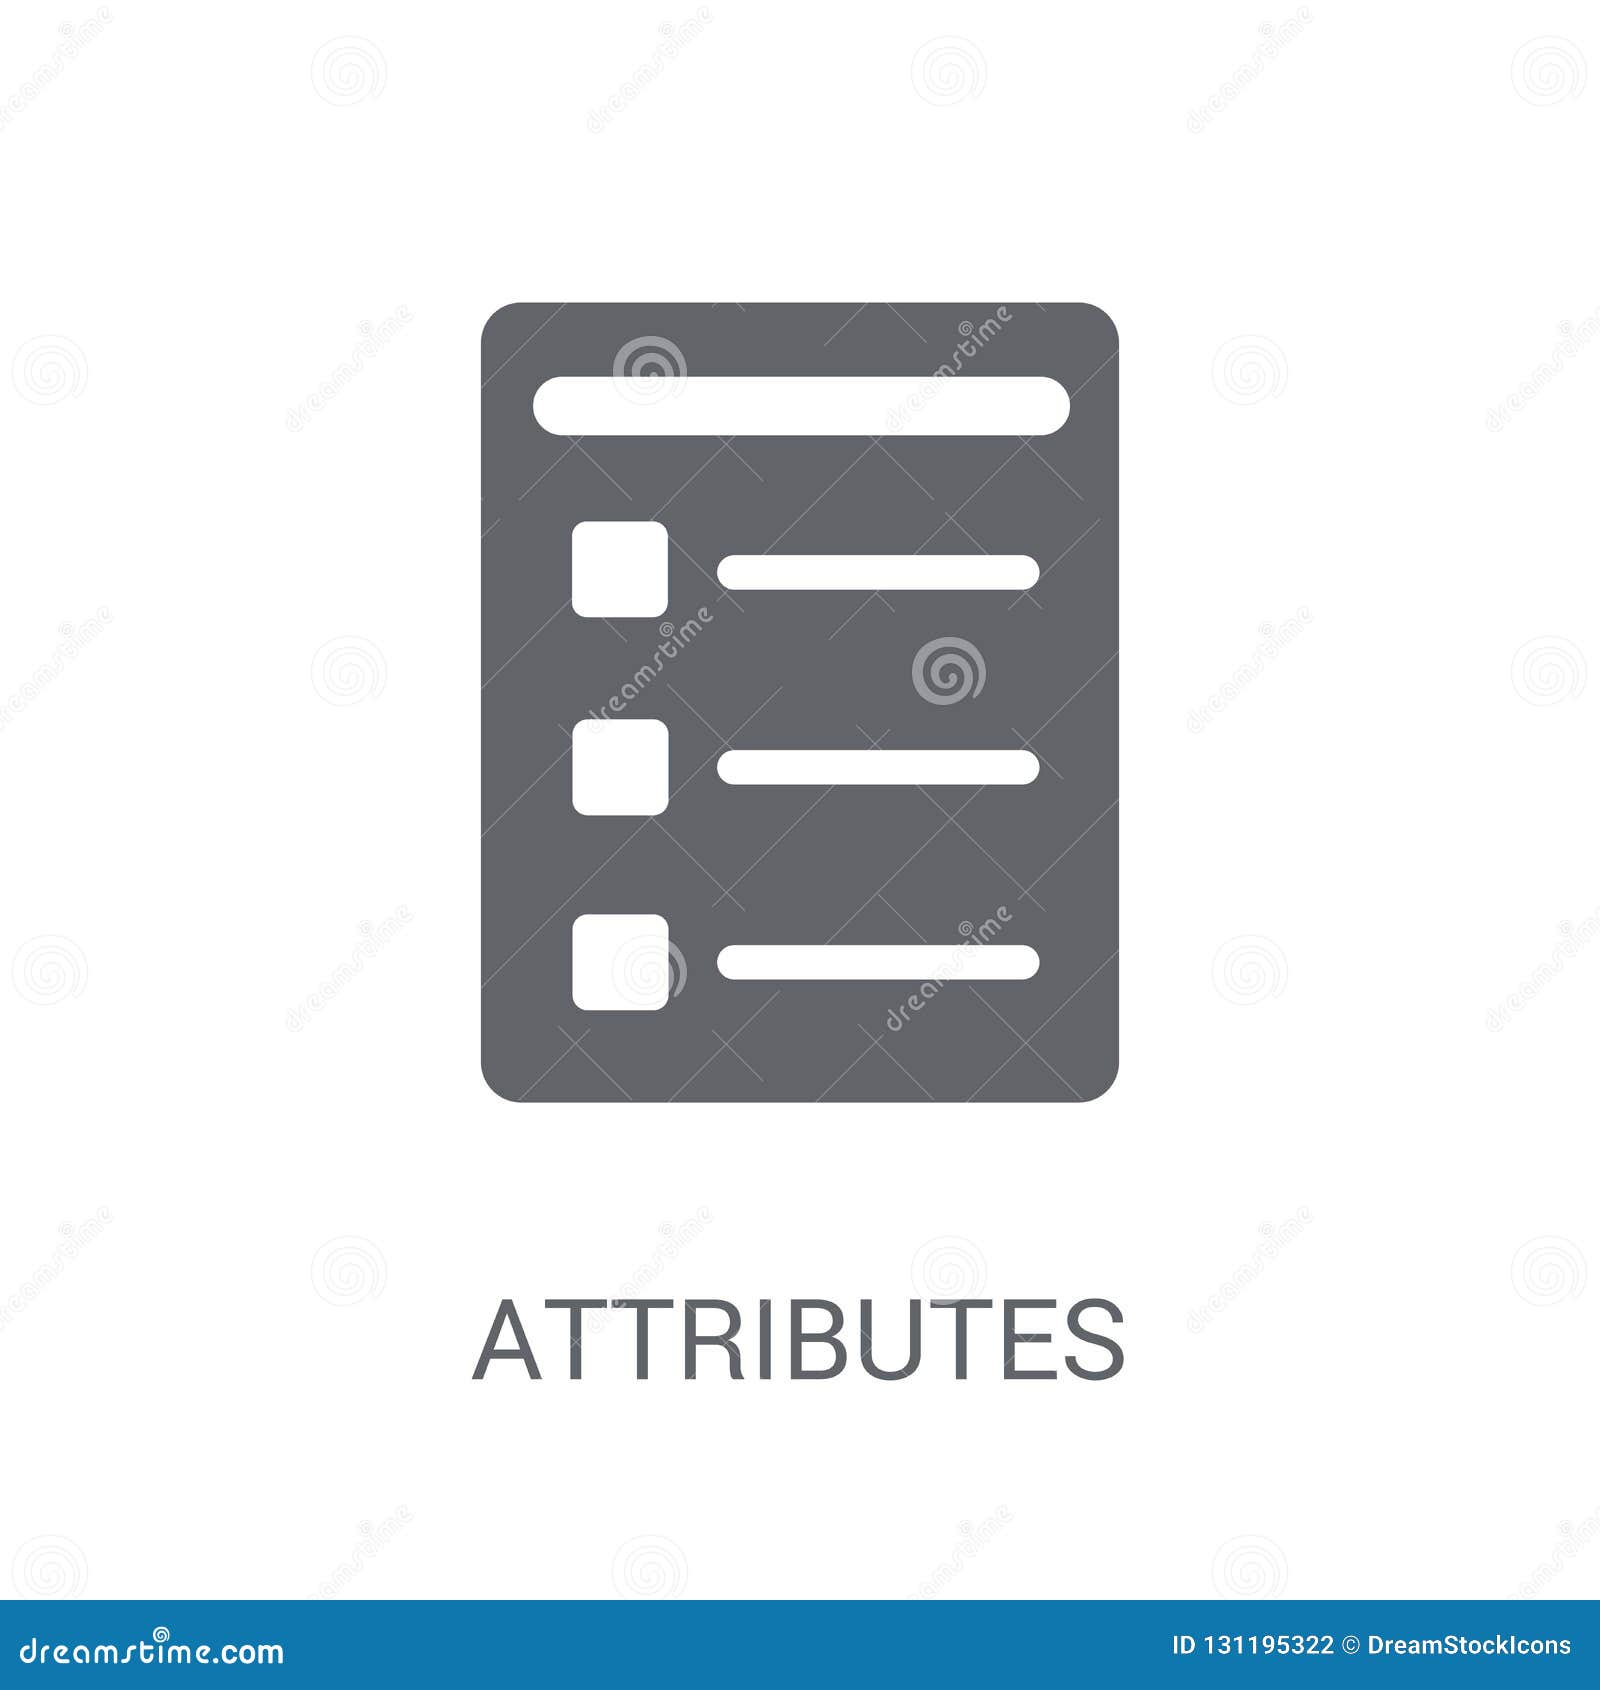 attributes icon. trendy attributes logo concept on white background from technology collection